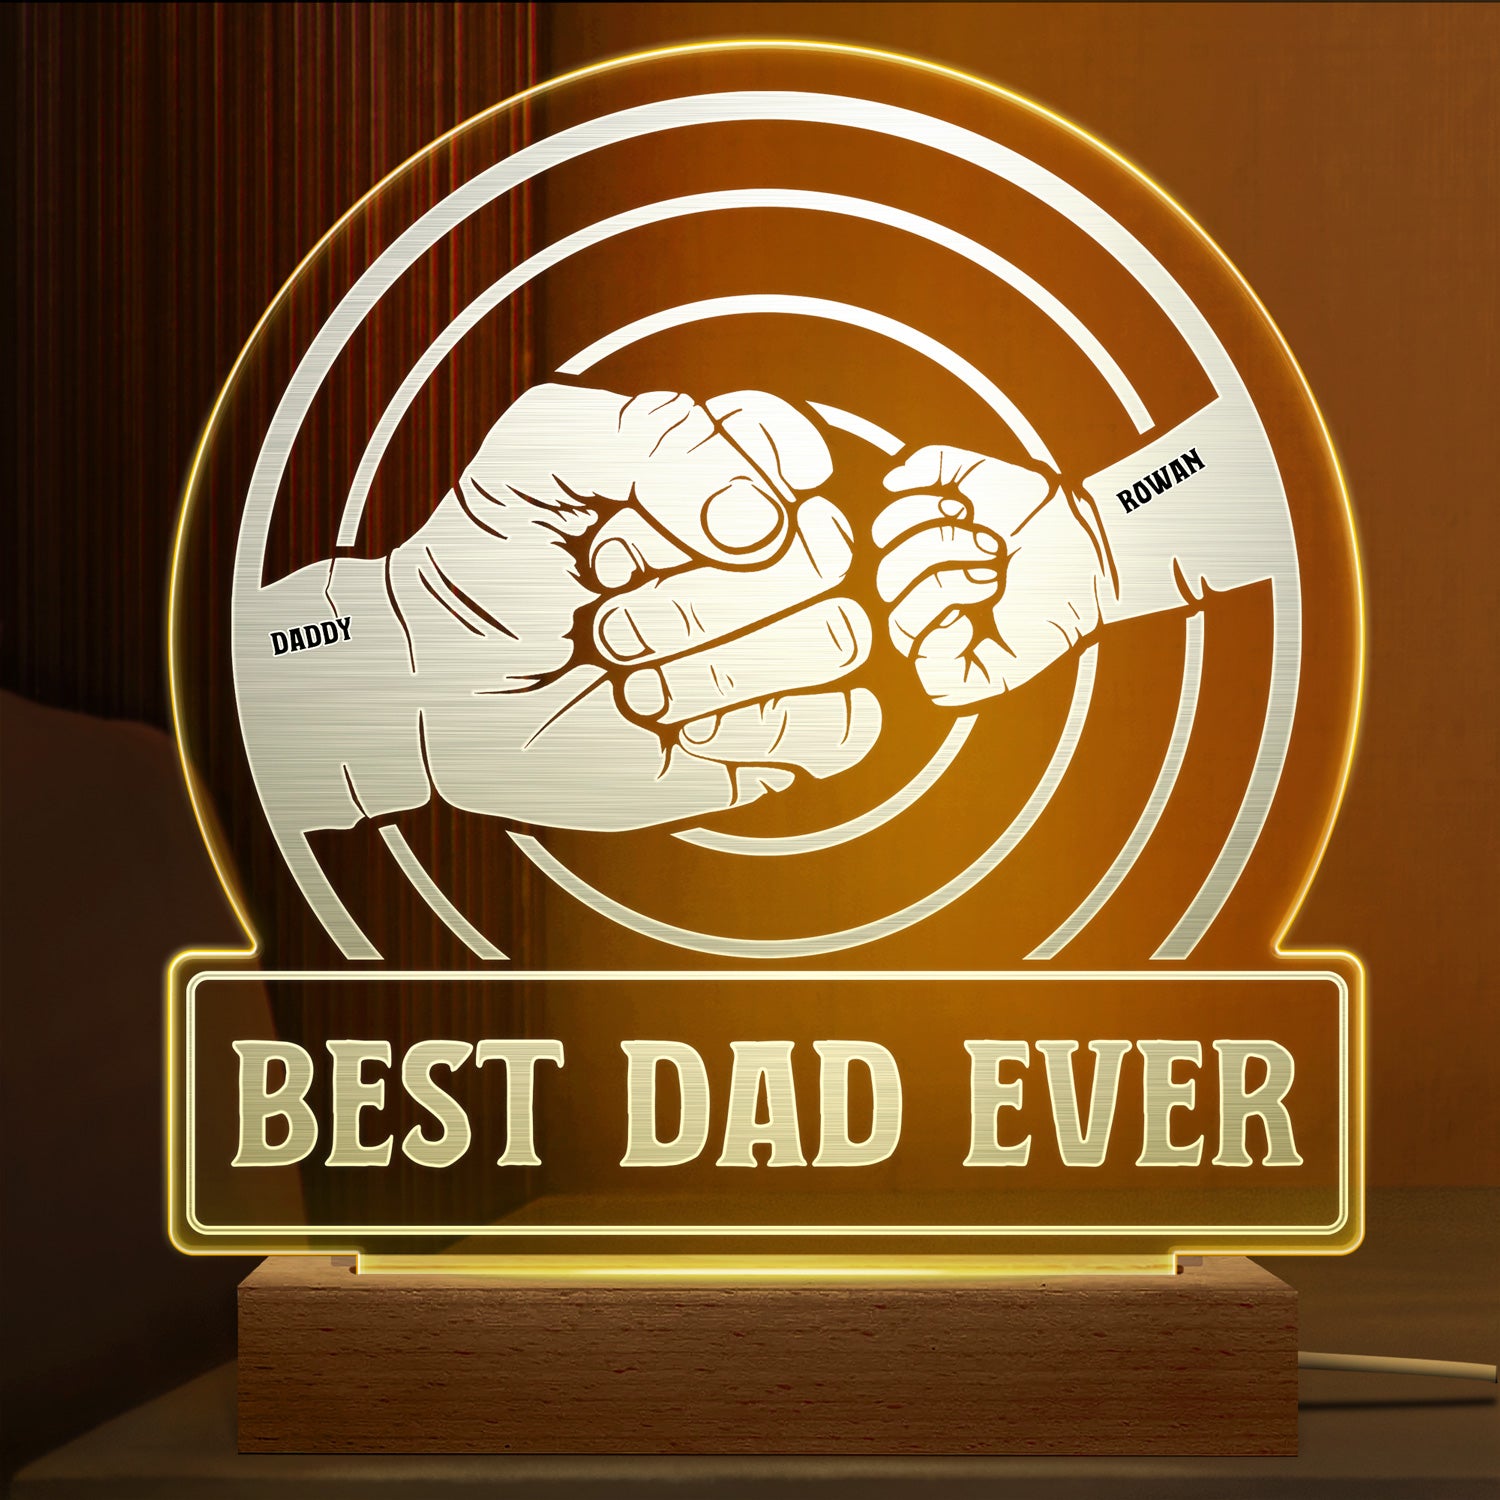 Best Dad Ever - Birthday, Loving Gift For Father, Grandpa, Grandfather - Personalized Custom 3D Led Light Wooden Base